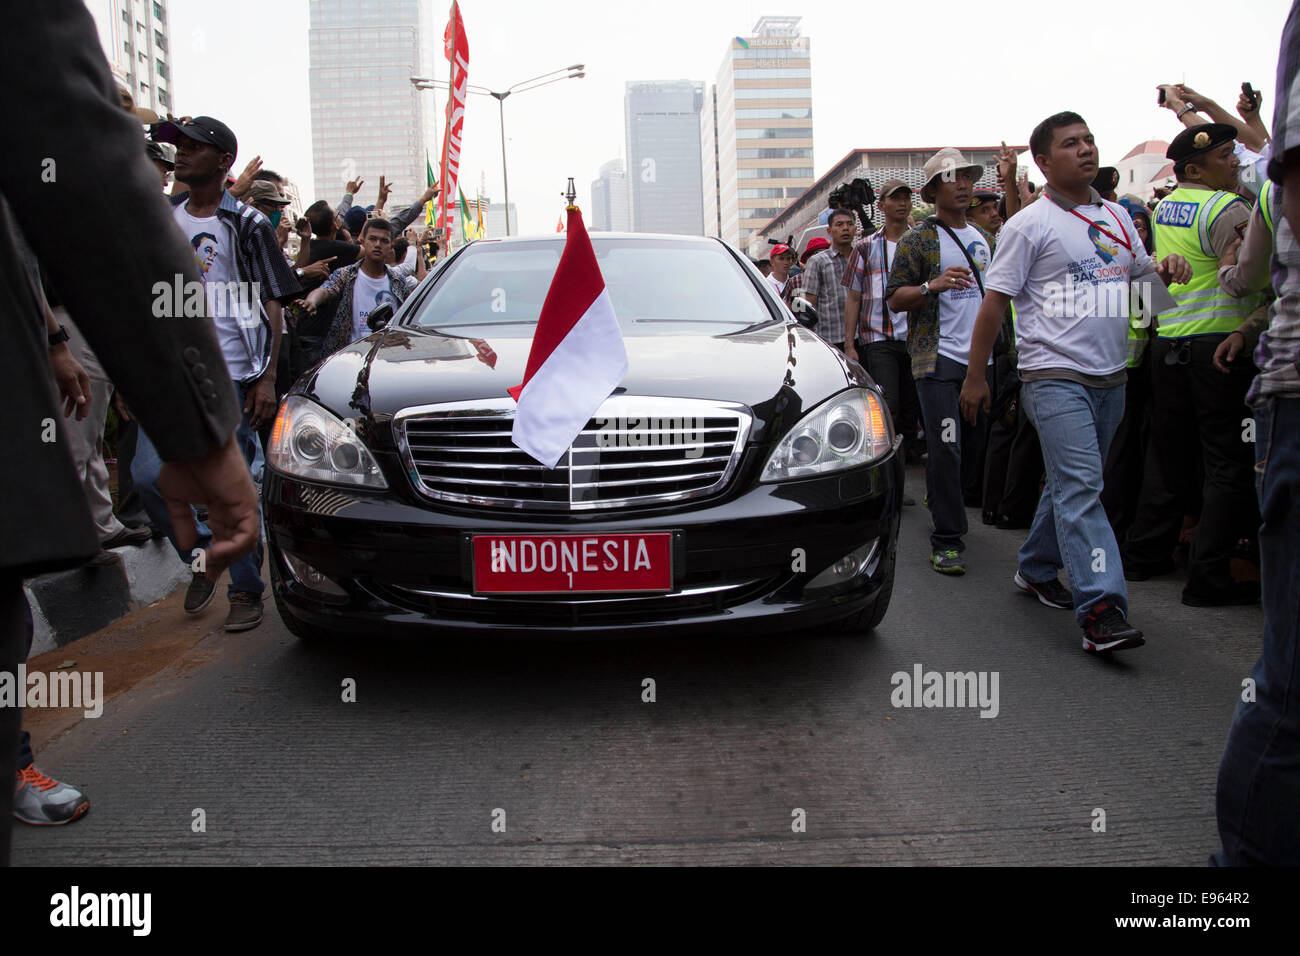 Jakarta, Indonesia. 20th Oct, 2014. Indonesia 1 Jokowi car joining the convoy. Jokowi inauguration celebration held arround Hotel Indonesia roundabout to Indonesian Palace as the new president riding Indonesian traditional horse-drawn carriage called 'Kereta Kencana'. Credit:  Donal Husni/Alamy Live News Stock Photo